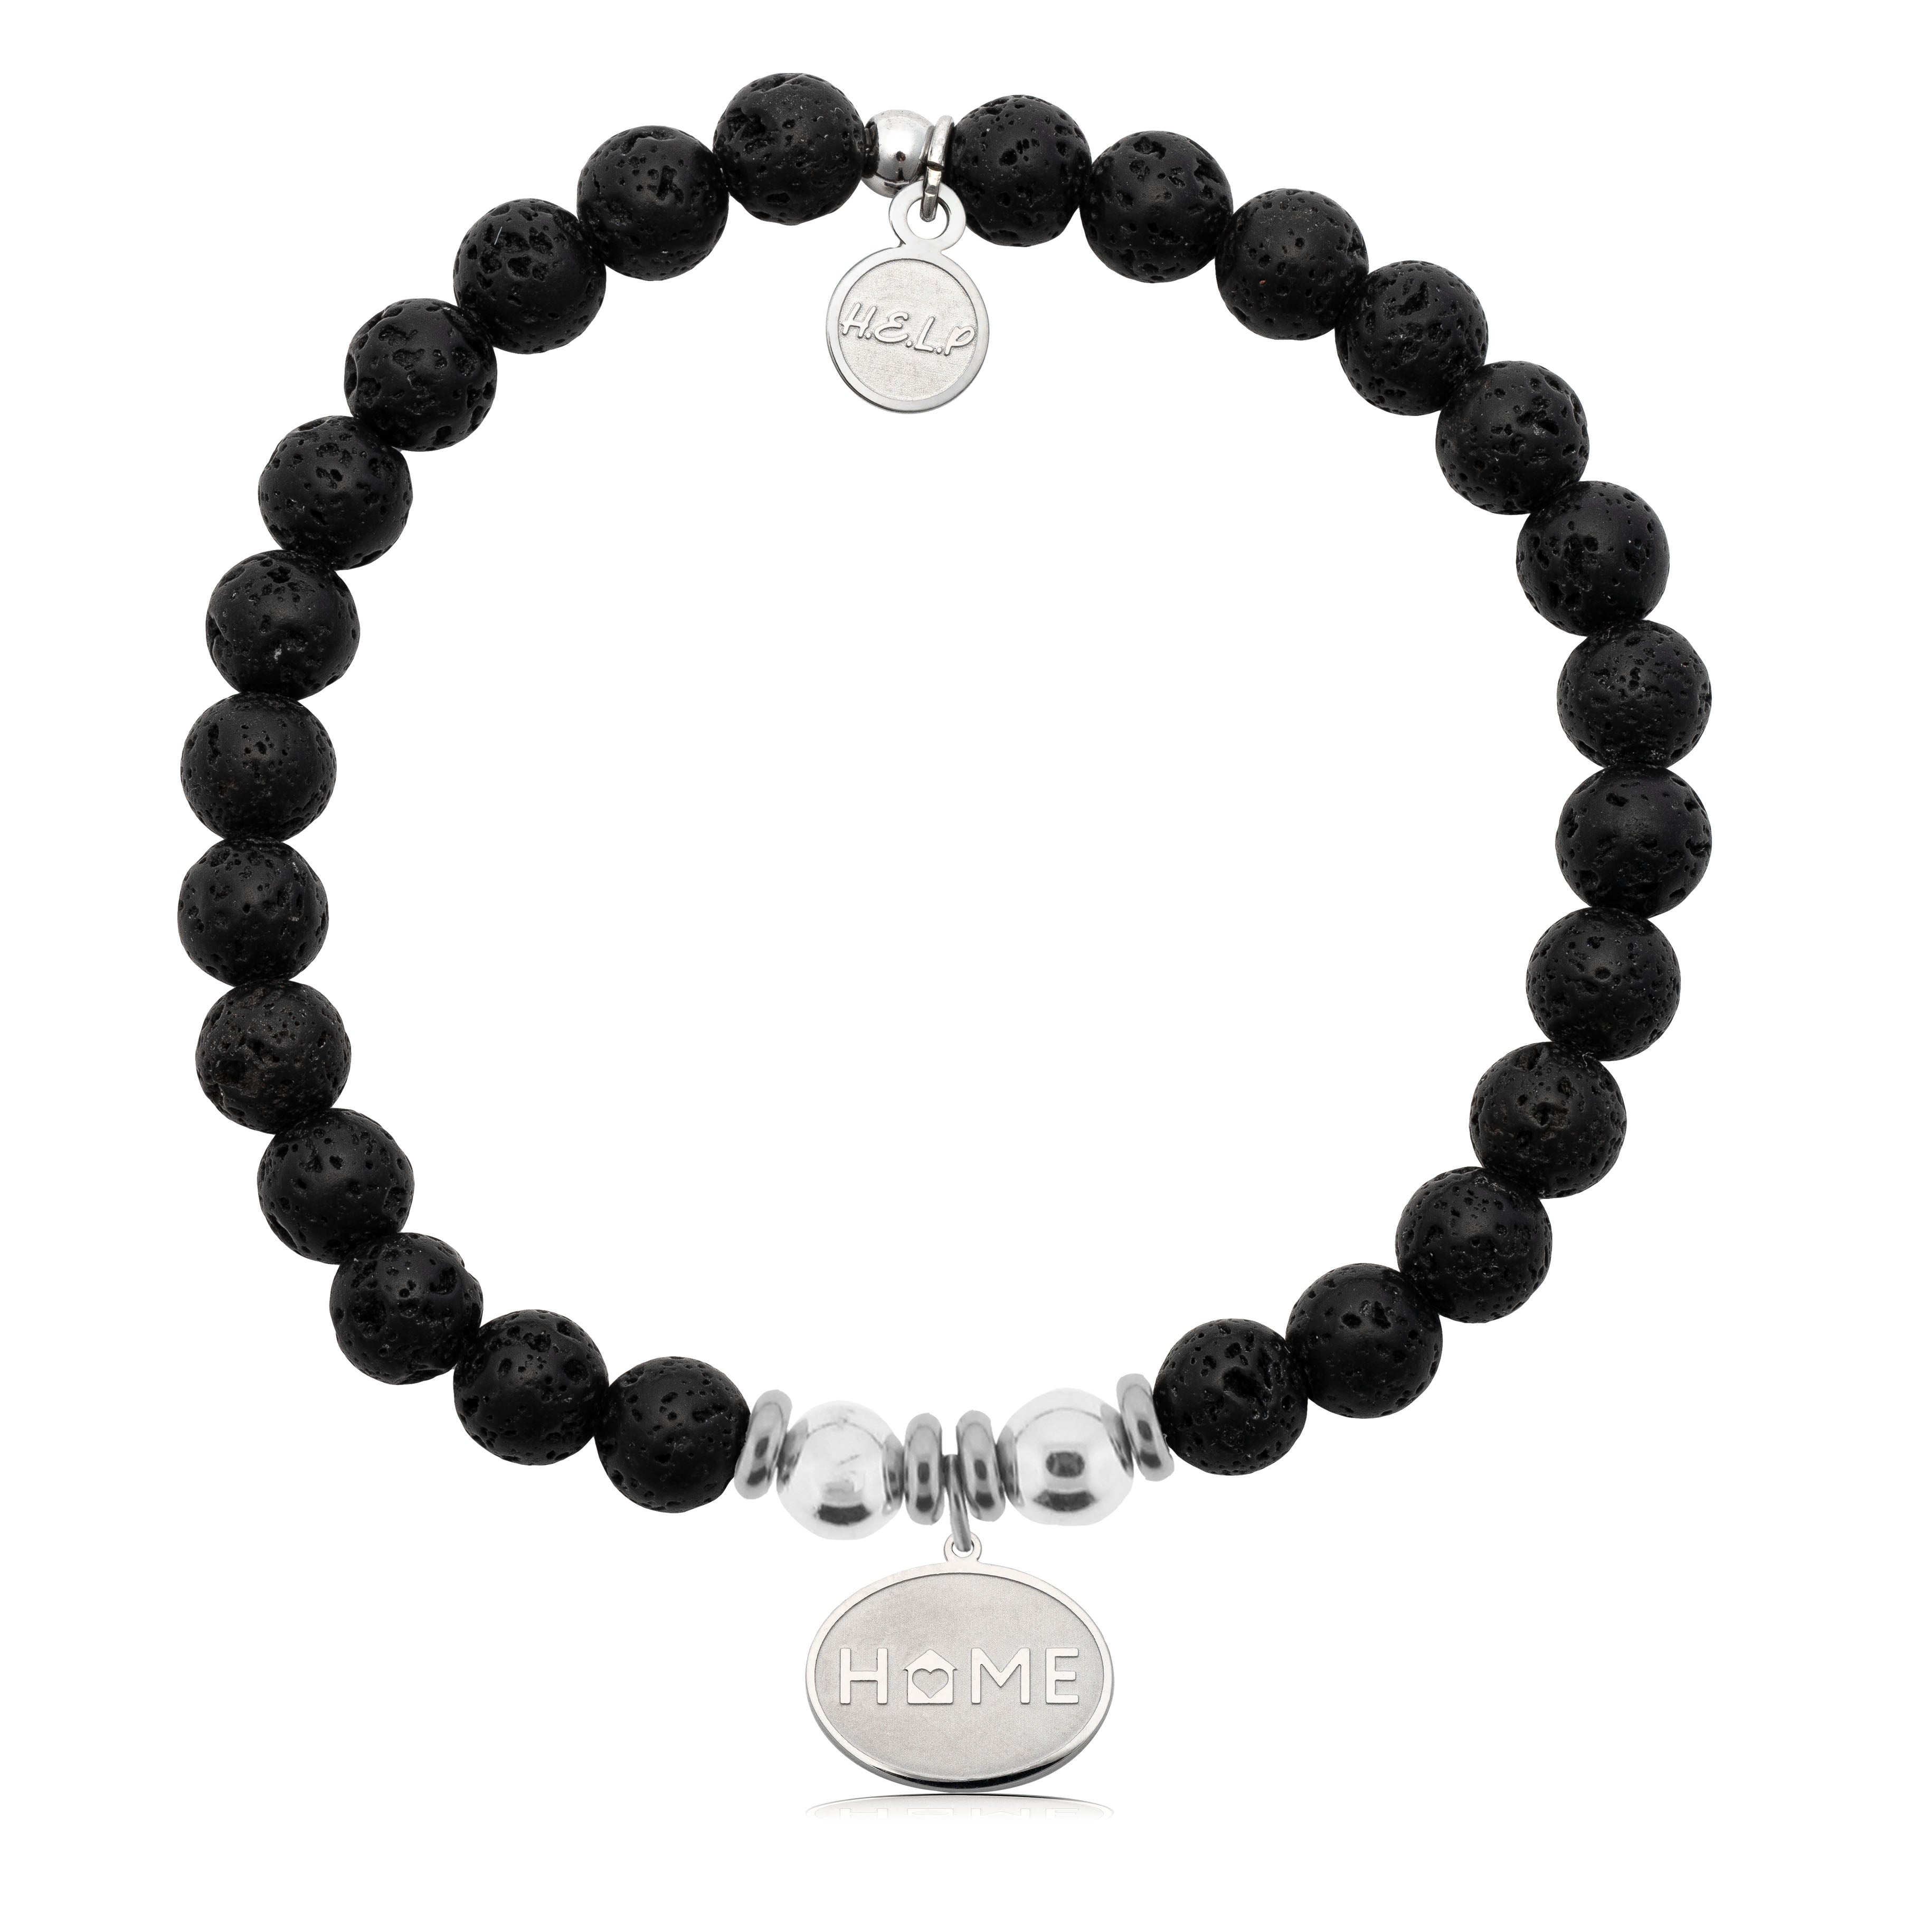 HELP by TJ Home Heart Charm with Lava Rock Charity Bracelet